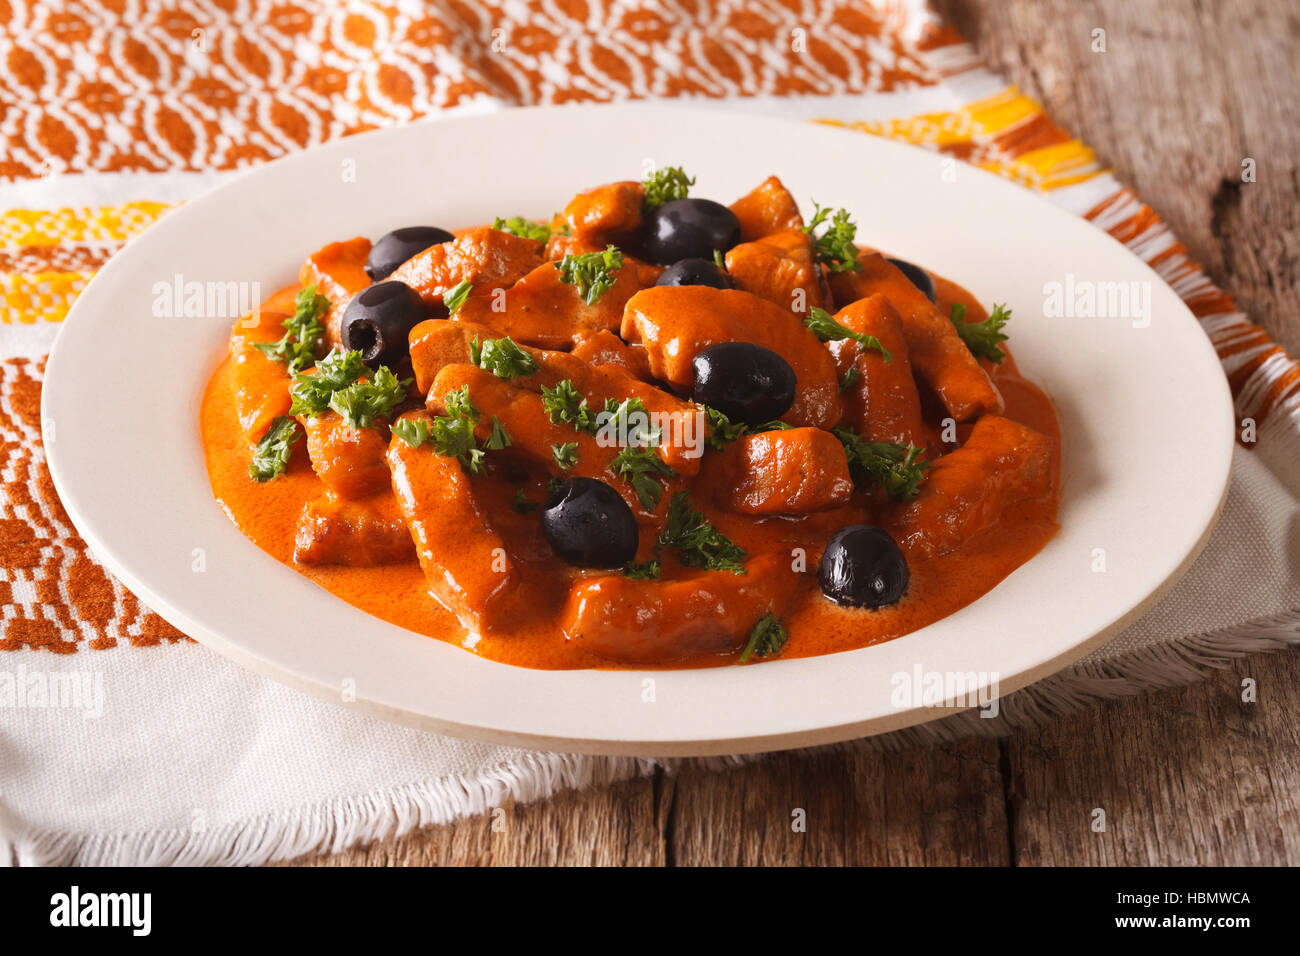 Spanish pieces of pork stewed in a spicy sauce of wine, tomatoes and cream with black olives close-up on a plate. horizontal Stock Photo